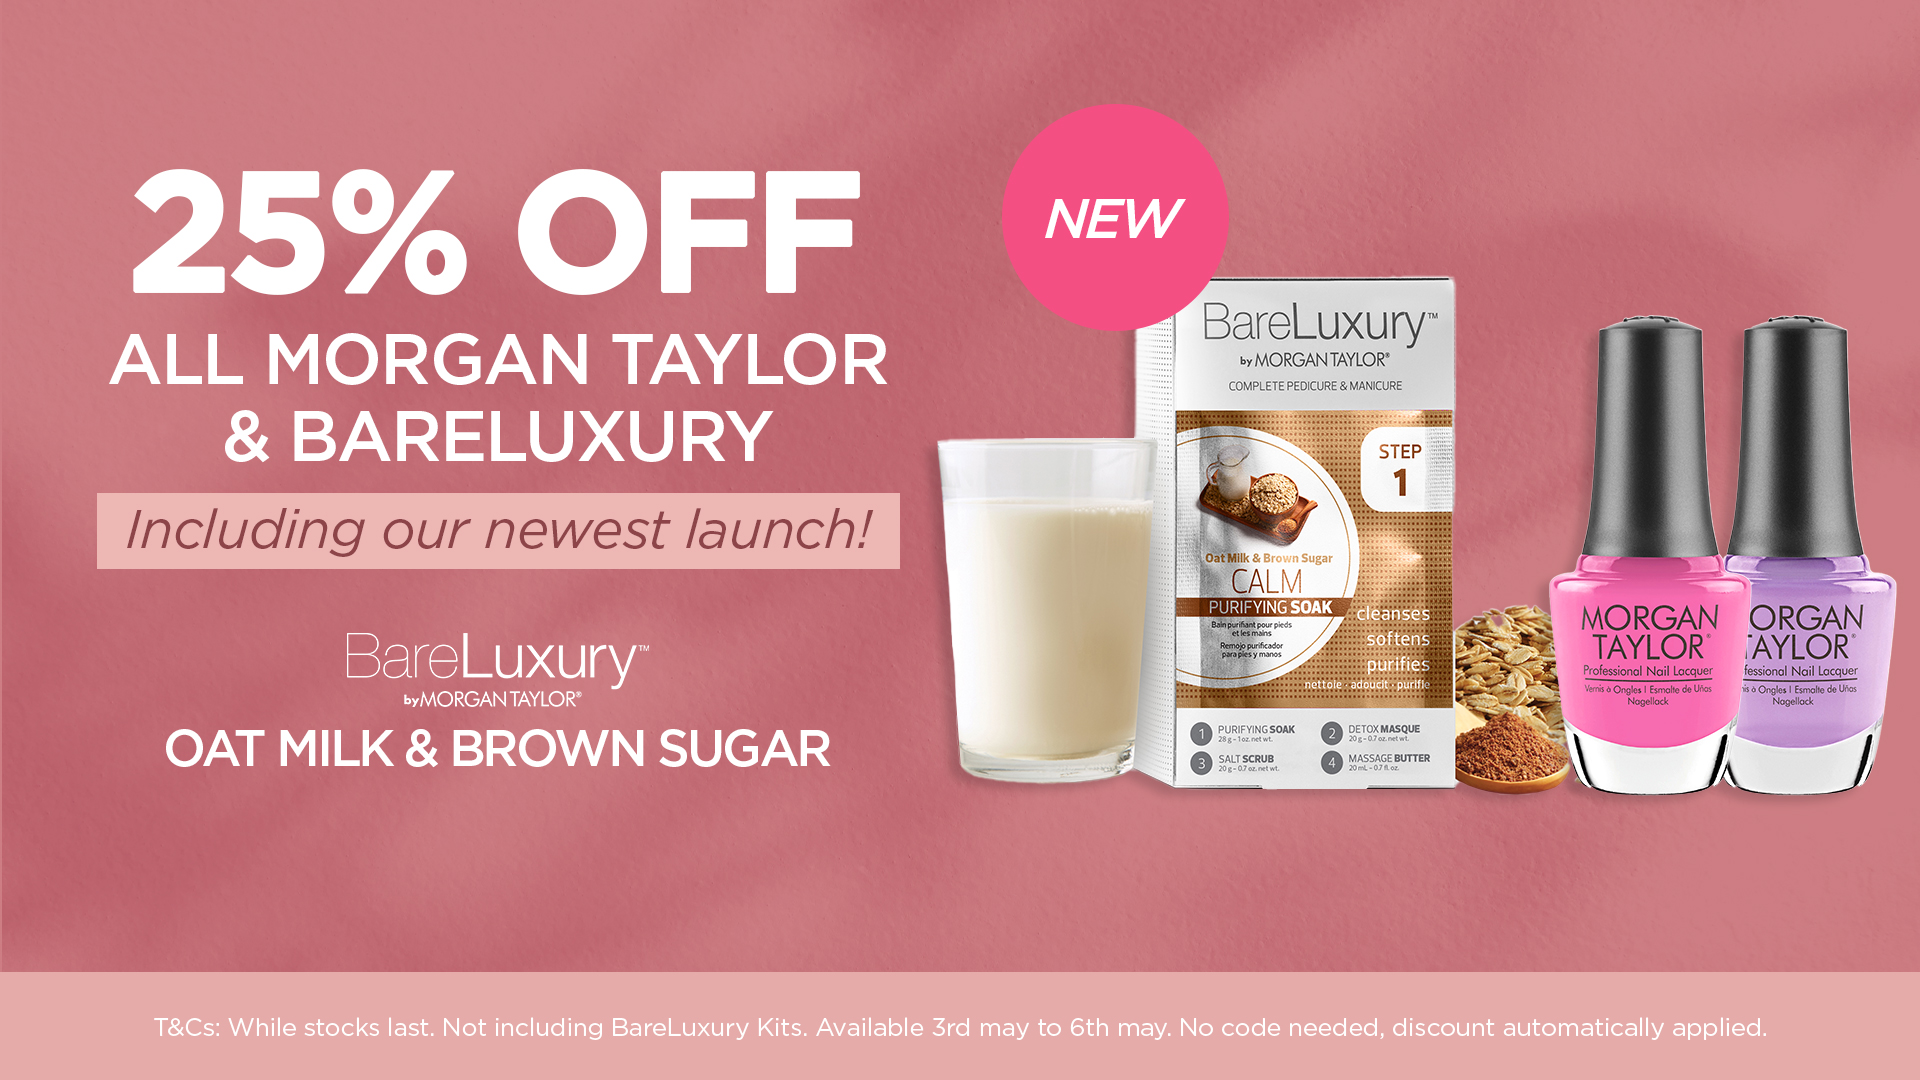 25% OFF all Morgan Taylor and BareLuxury including our newest launch! Terms: While stocks last. Not including BareLuxury Kits. Available 3rd May to 6th May. No code needed, discount automatically applied.